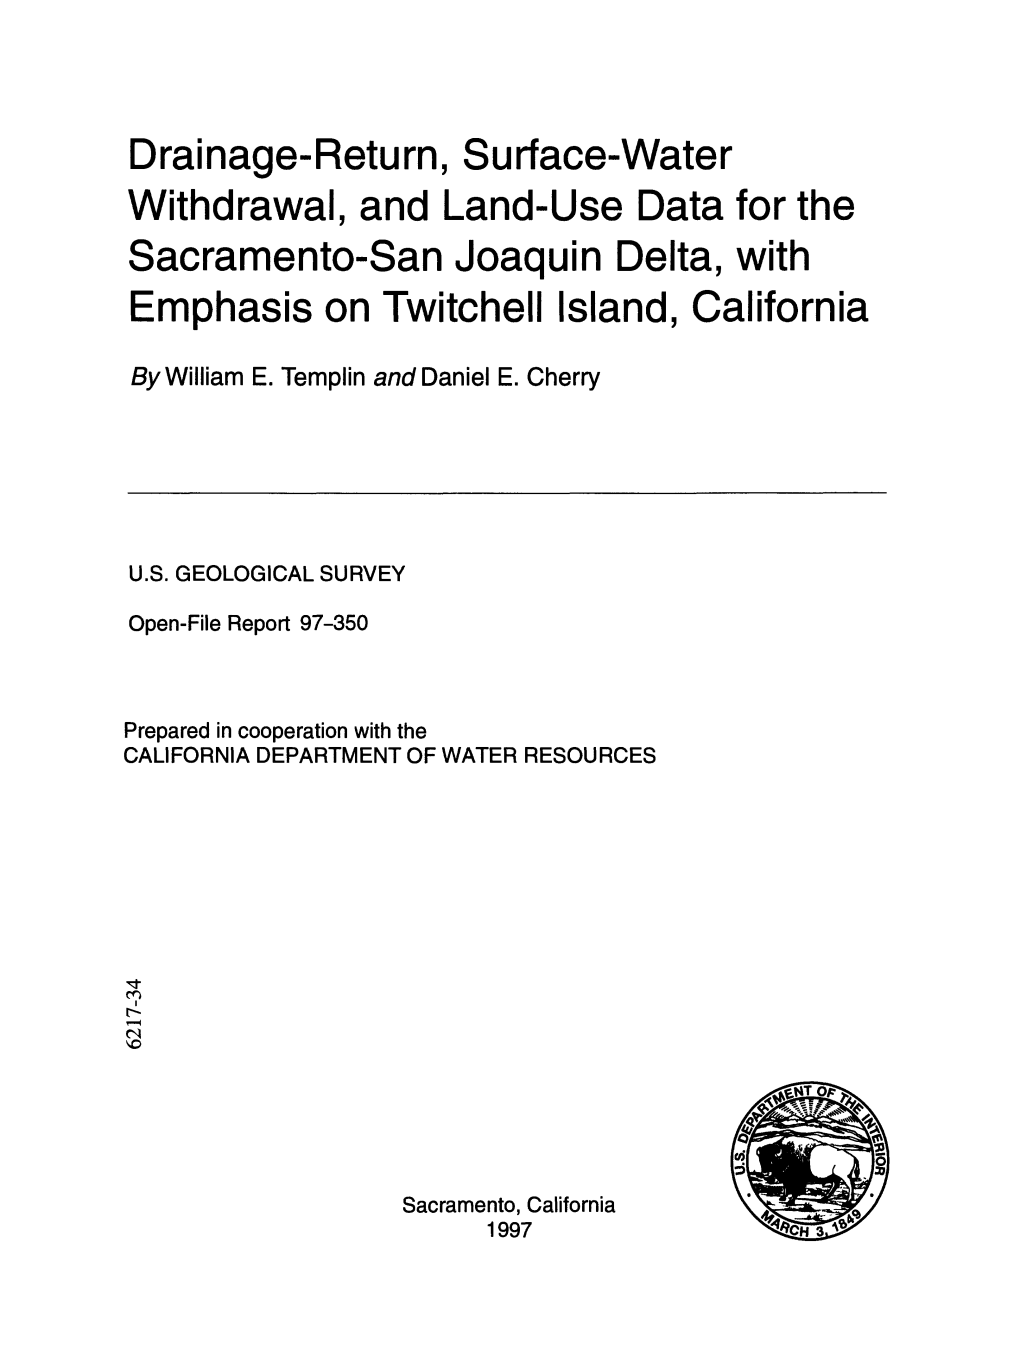 Drainage-Return, Surface-Water Withdrawal, and Land-Use Data for the Sacramento-San Joaquin Delta, with Emphasis on Twitchell Island, California